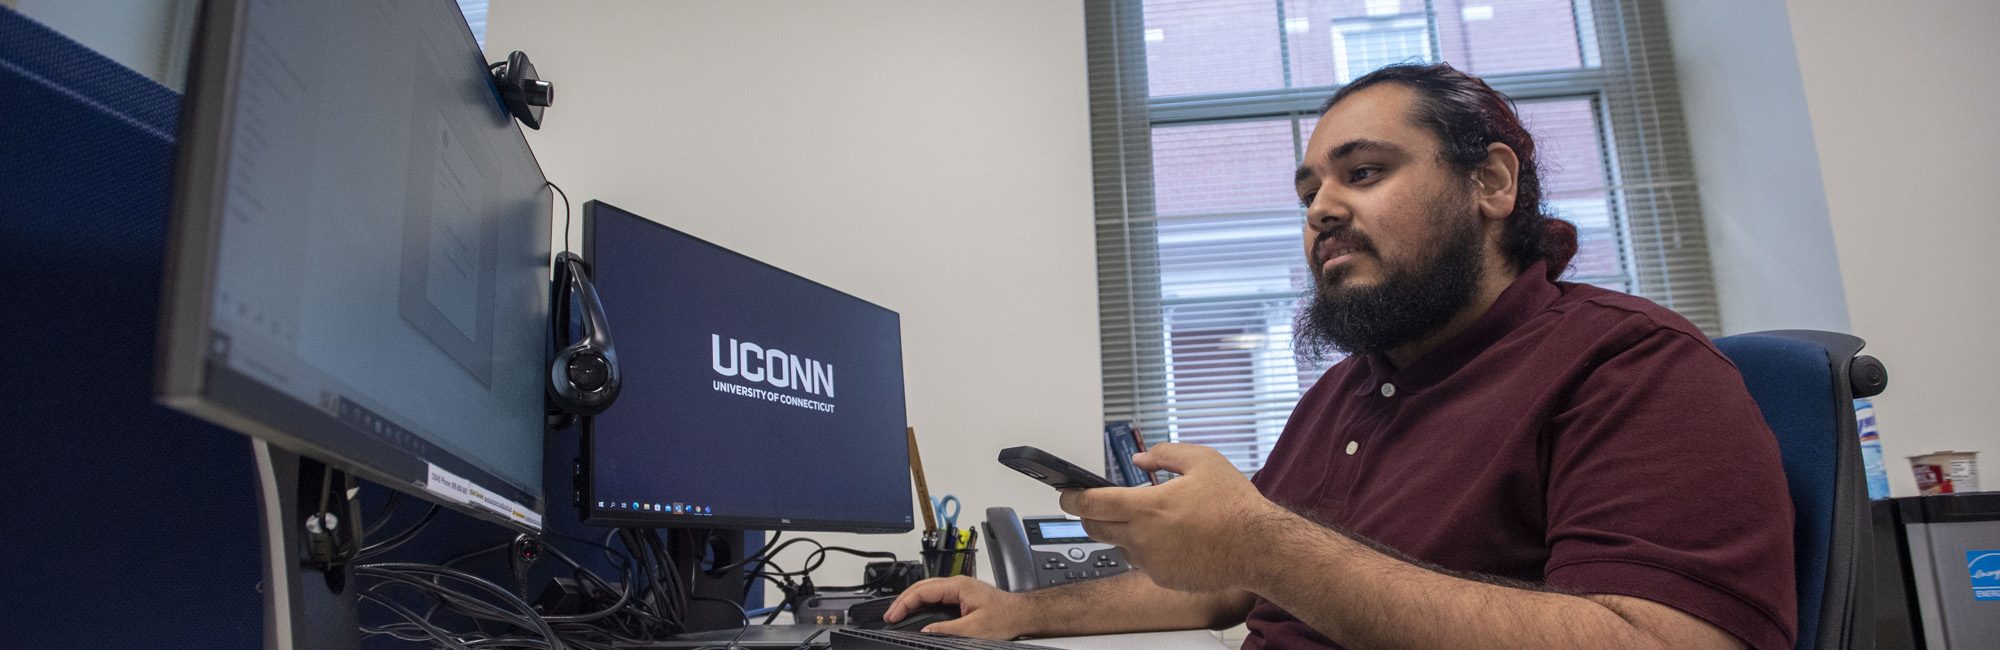 UConn Social Work student sitting in front of two large computer monitors.